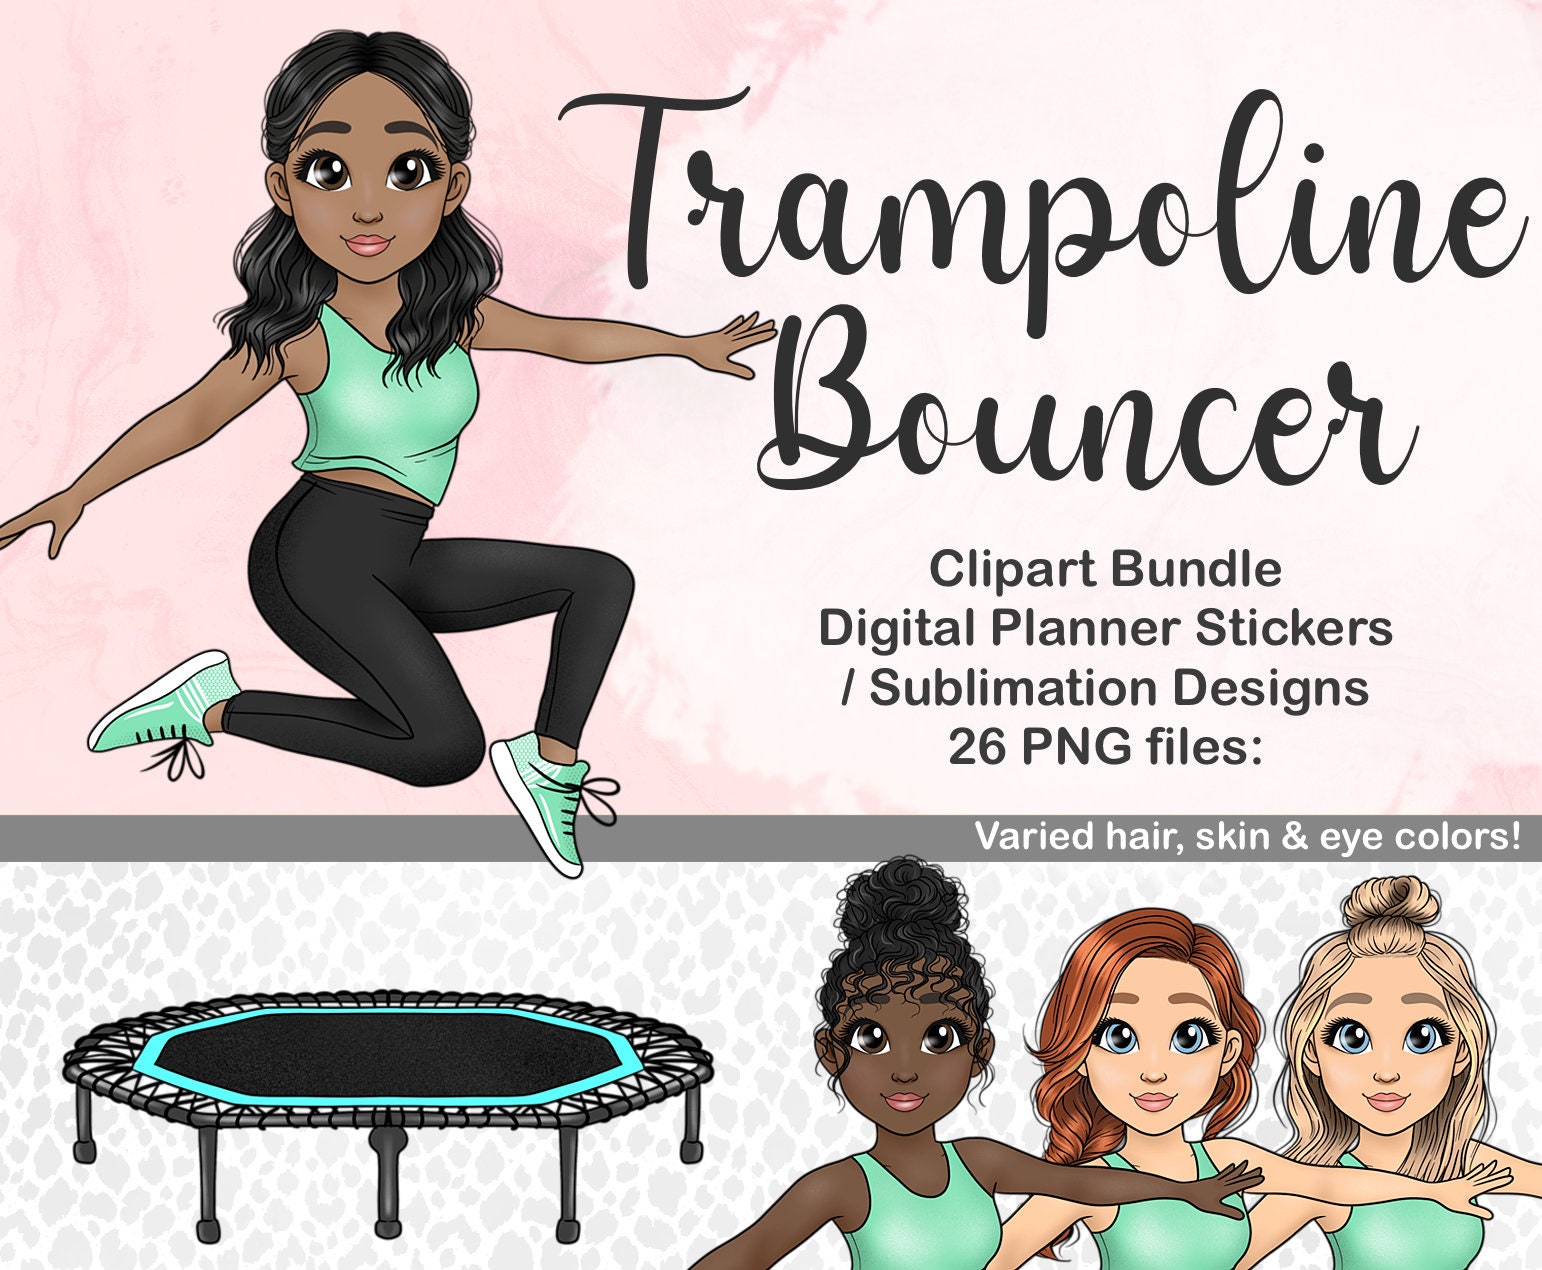 Outdoors and Recreation Clipart-girl jumping playing on trampoline clipart